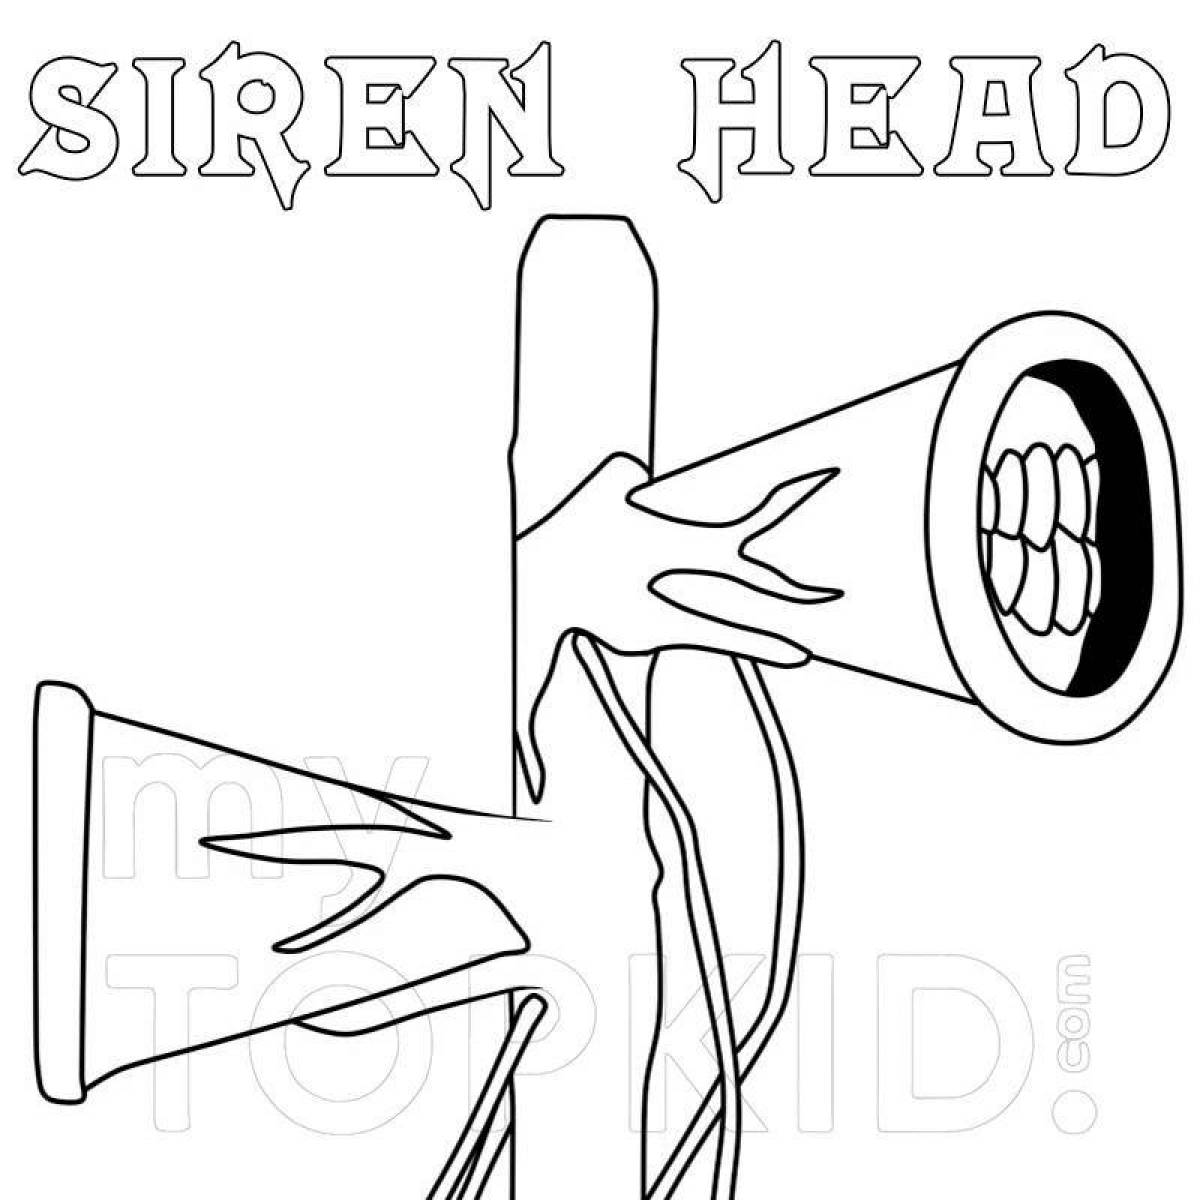 Great siren head coloring page for kids